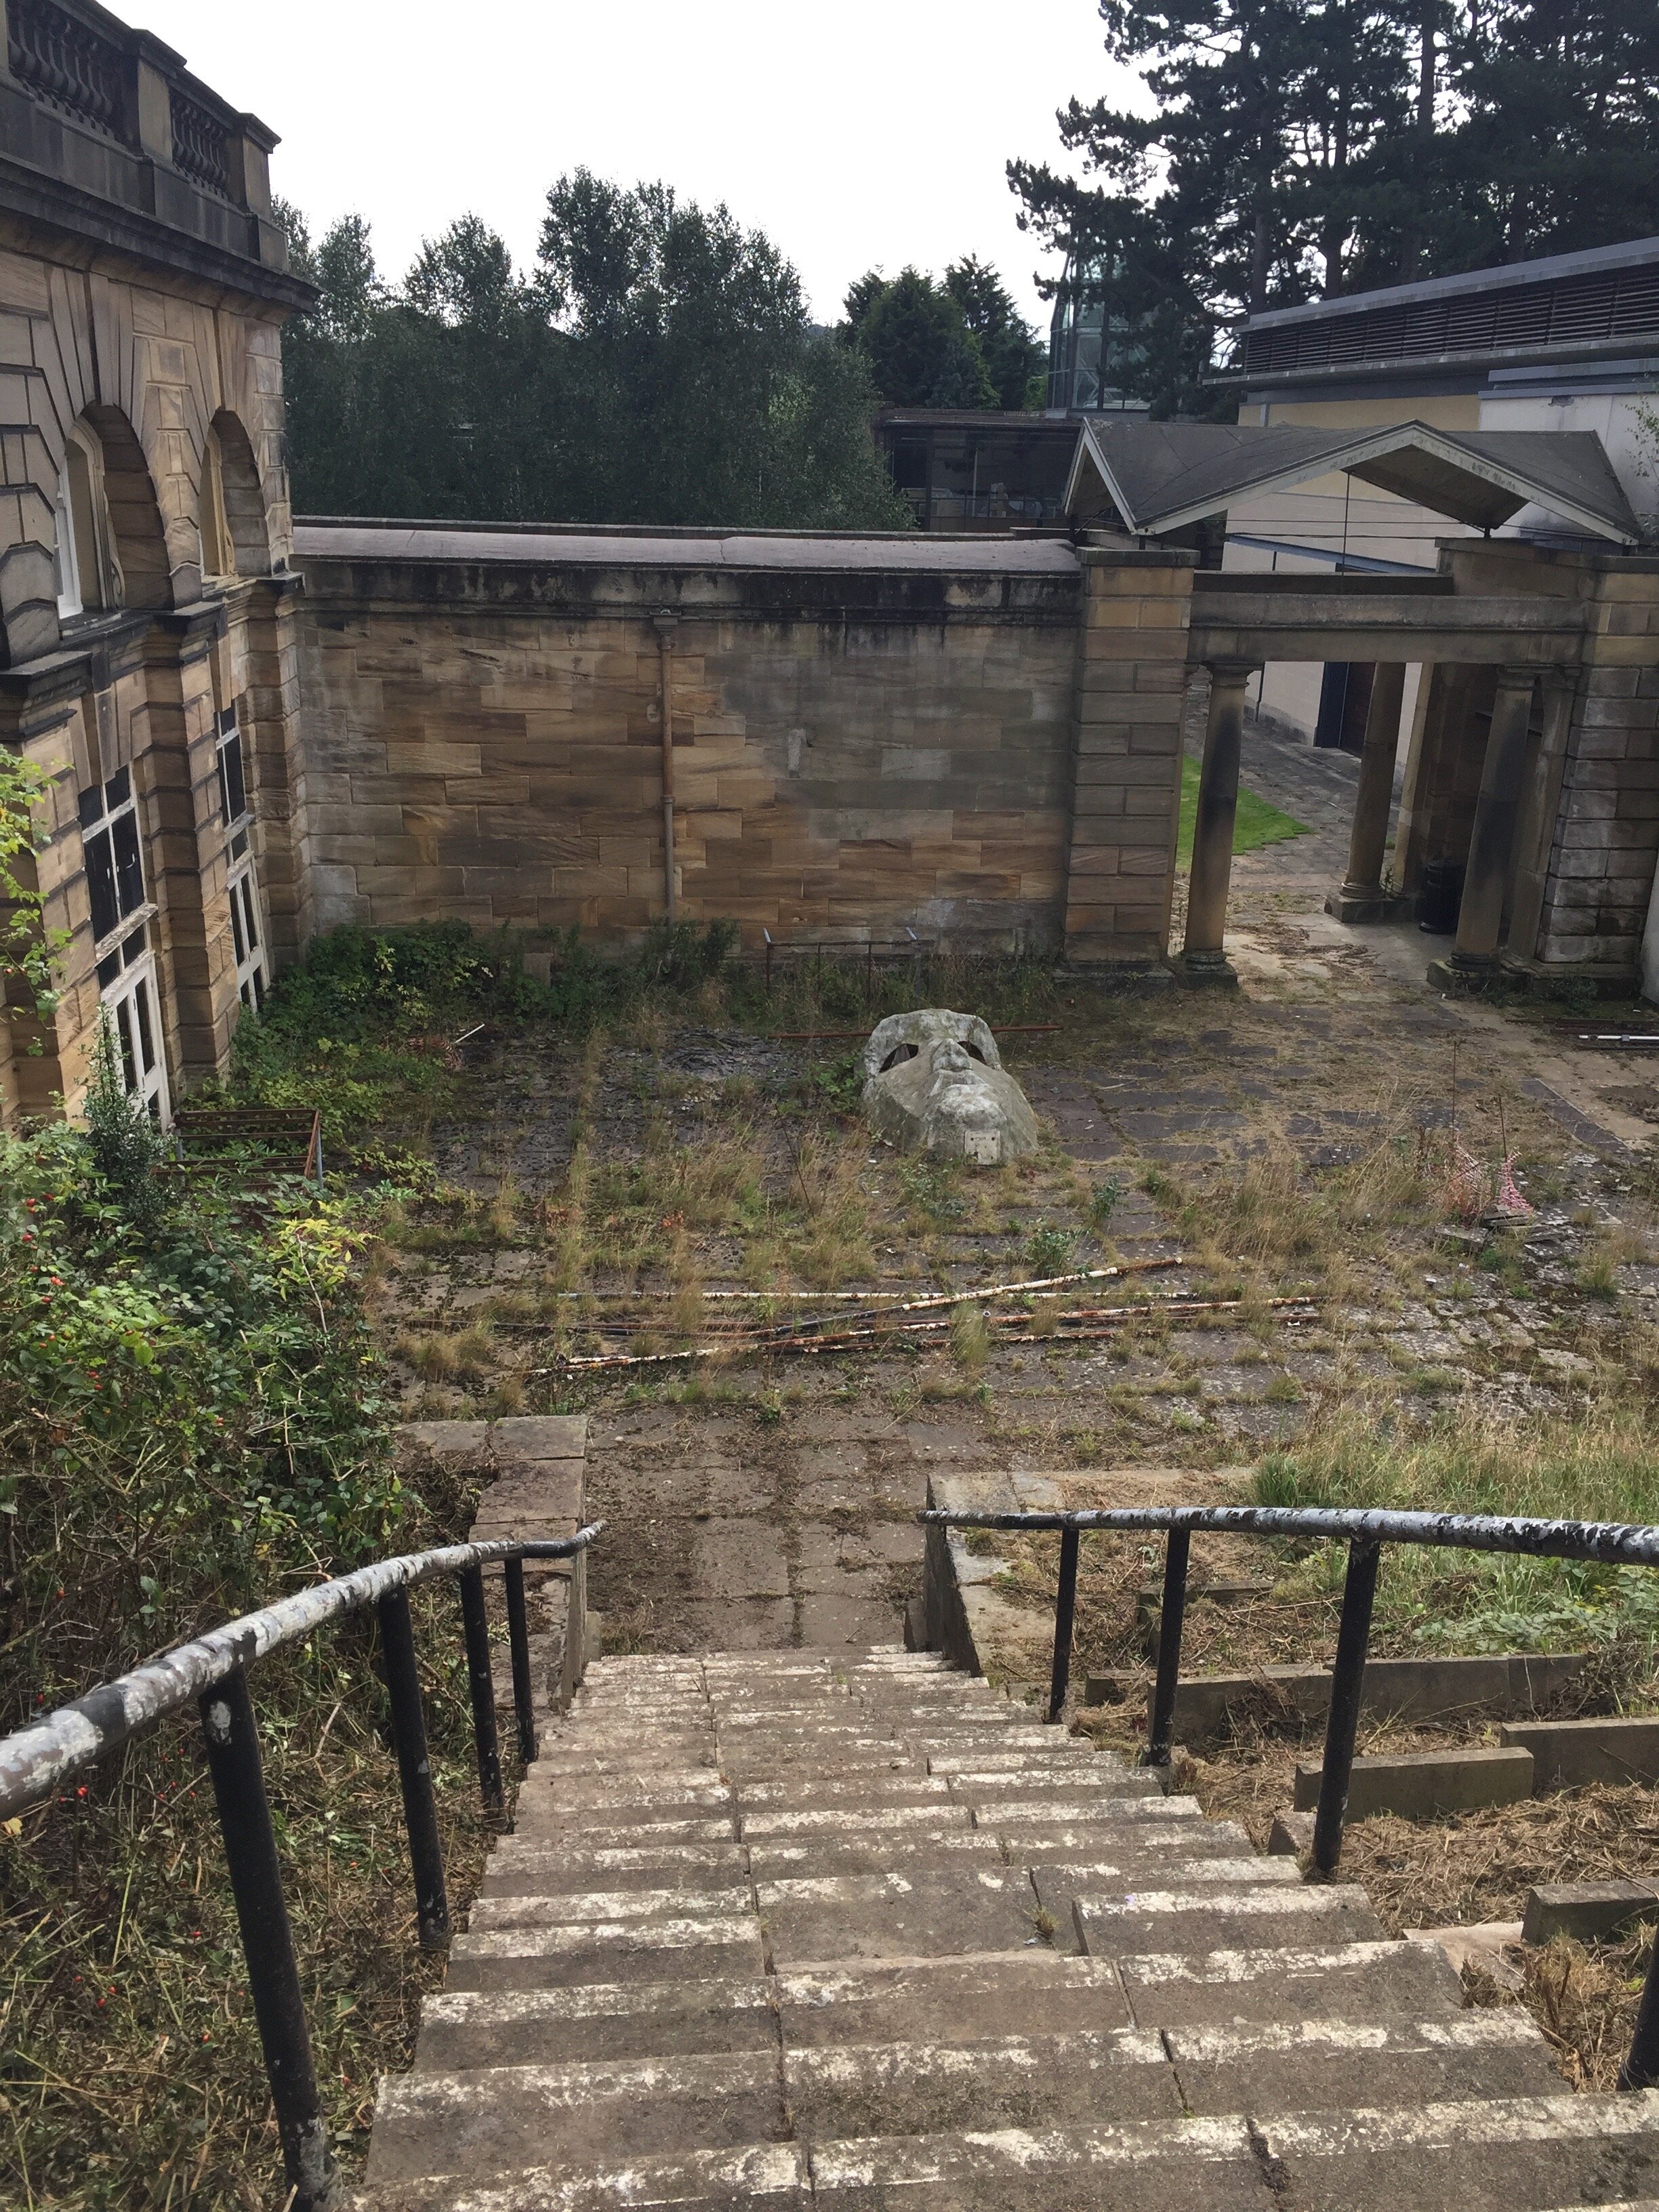  The performance area outside Experimental Theatre. Alongside the steps, the slabs would have formed staged seating on the bank, creating an amphitheatre. The site has been so long abandoned that it seems the signs of early attempts to tend to it hav